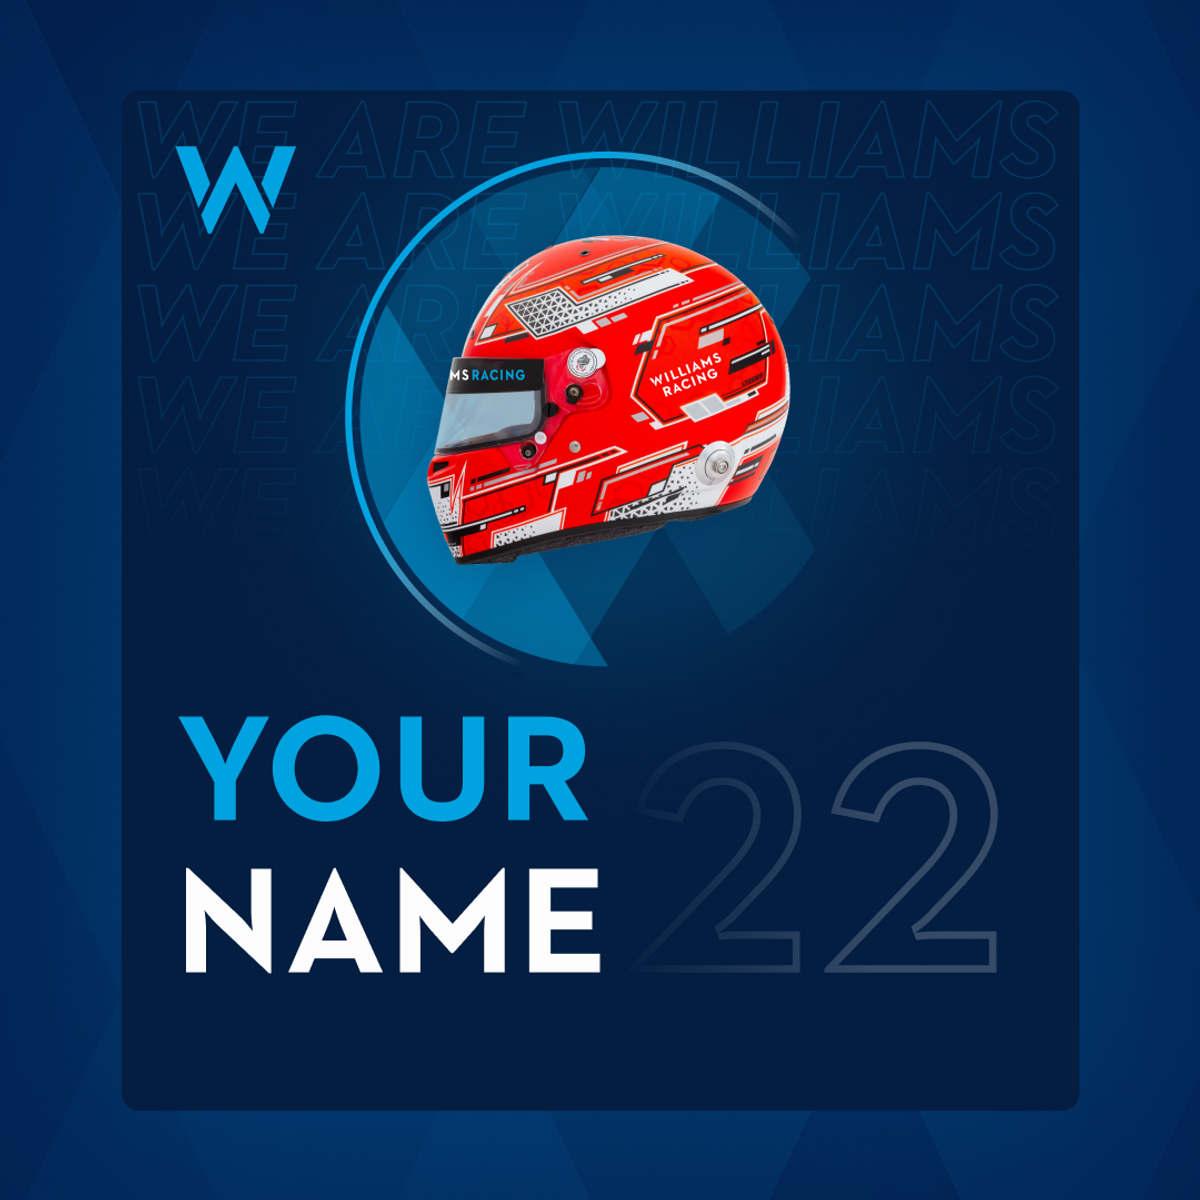 How To Claim Your Own Williams Racing Driver Card Williams Racing